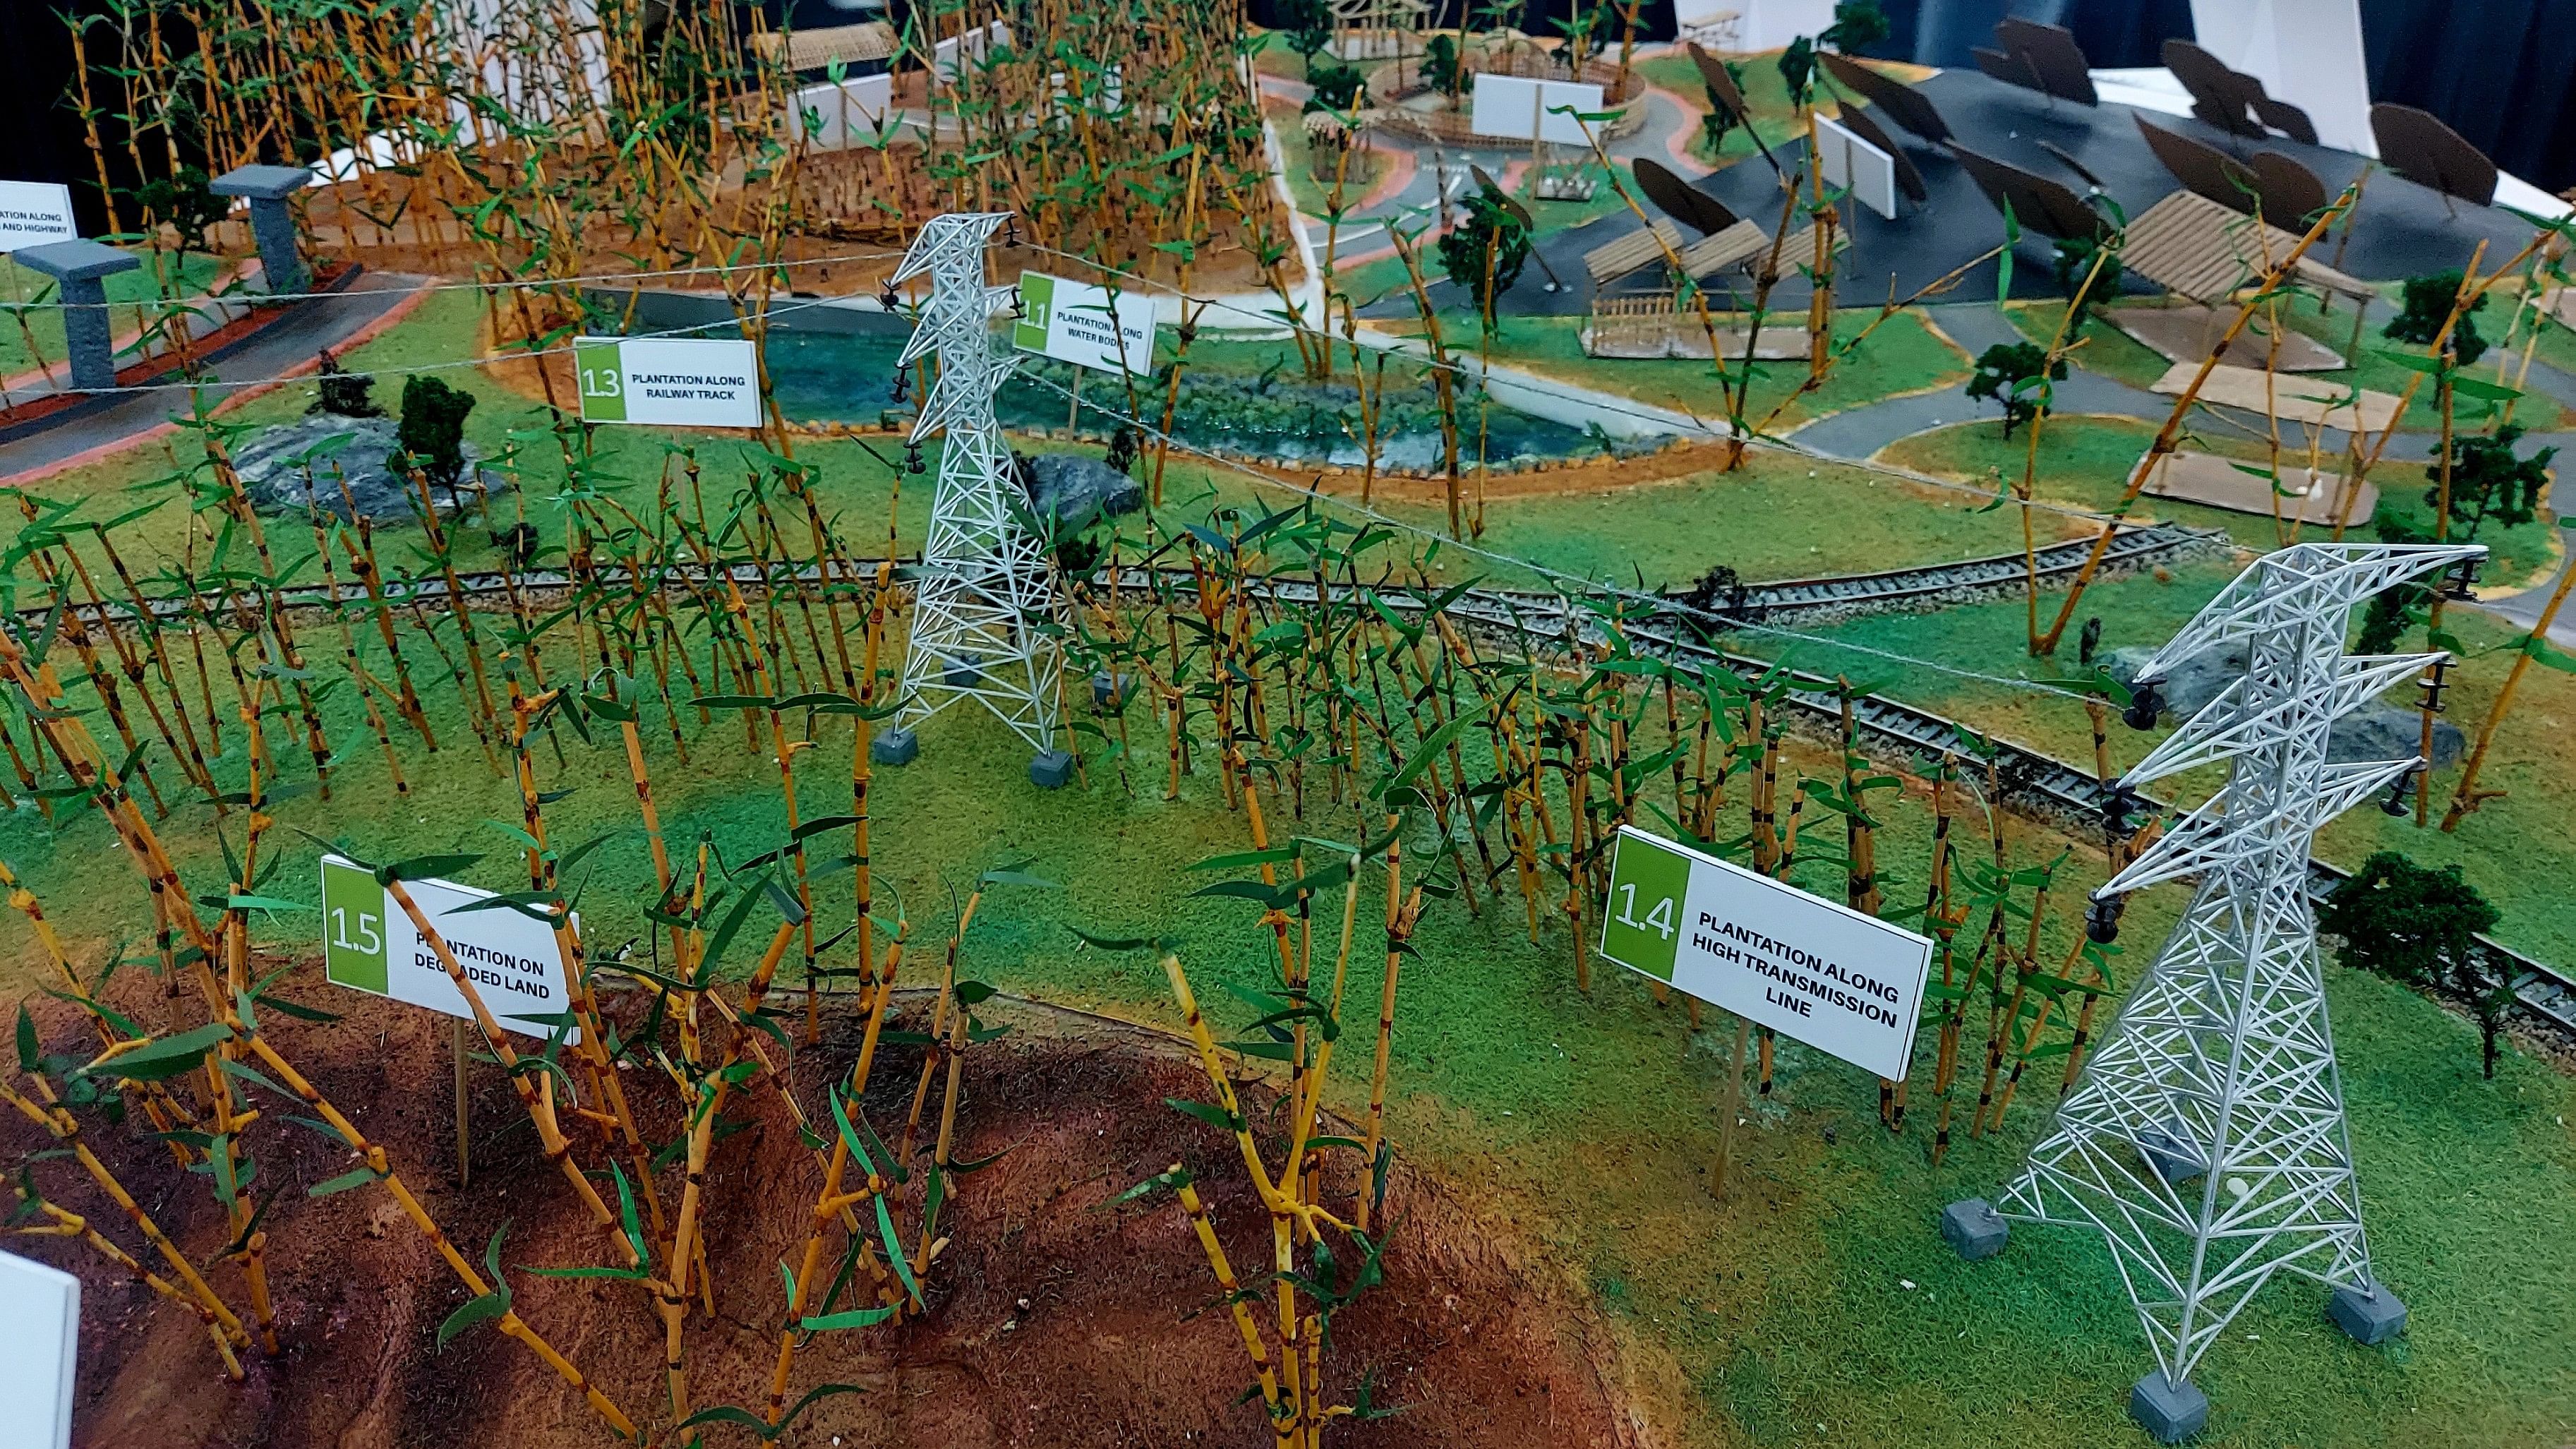 A model of ‘The Bamboo City, Bengaluru’ was exhibited at an art centre on M G Road recently